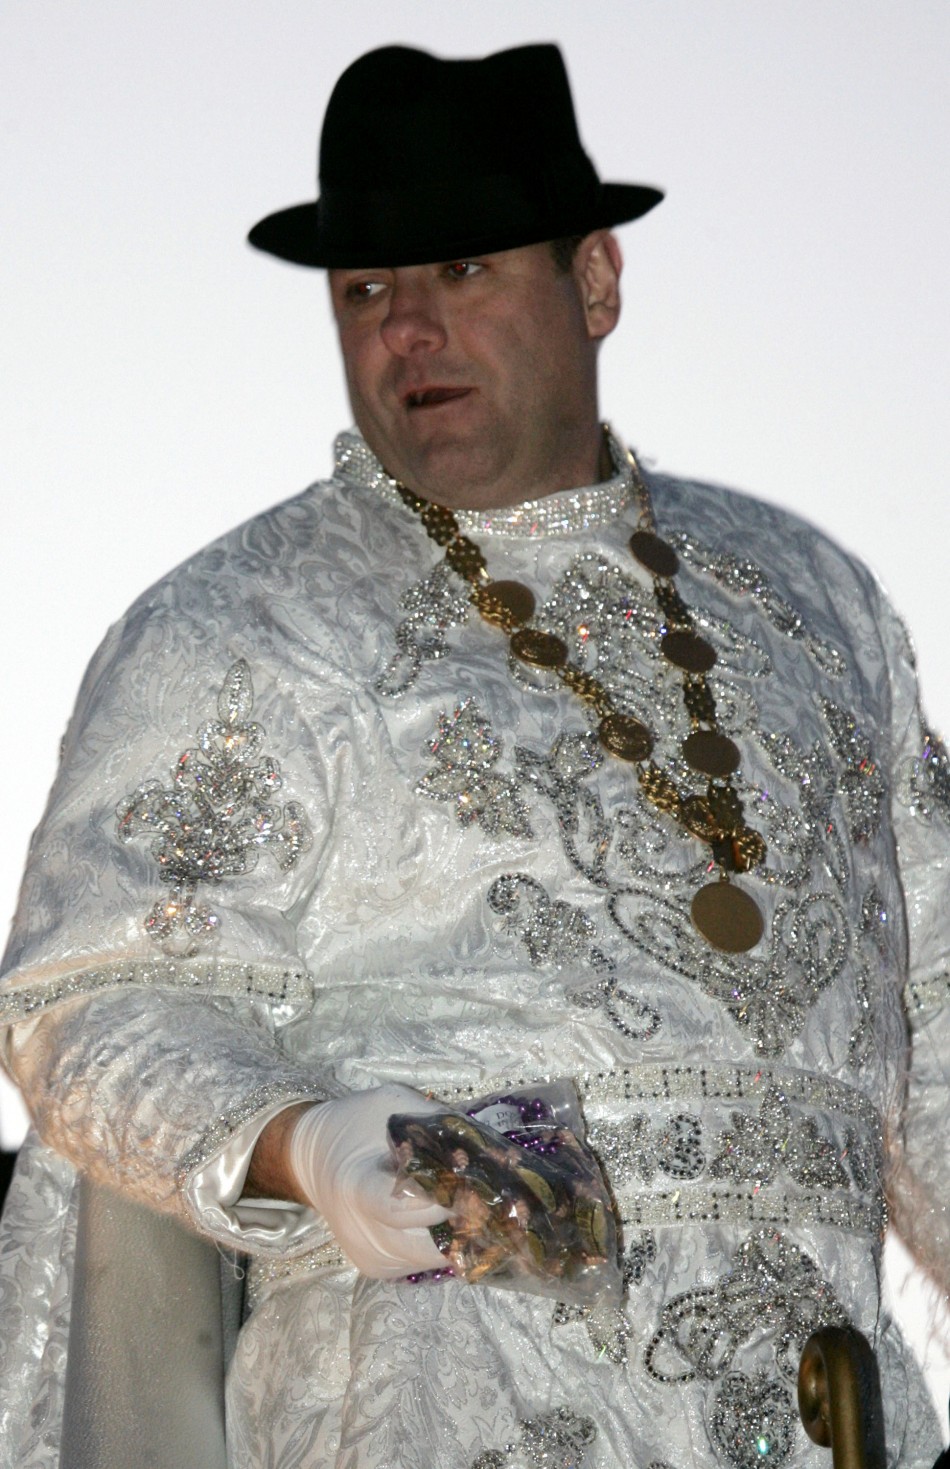 James Gandolfini, in unfamiliar getup, throws beads to revellers at a New Orleans street parade